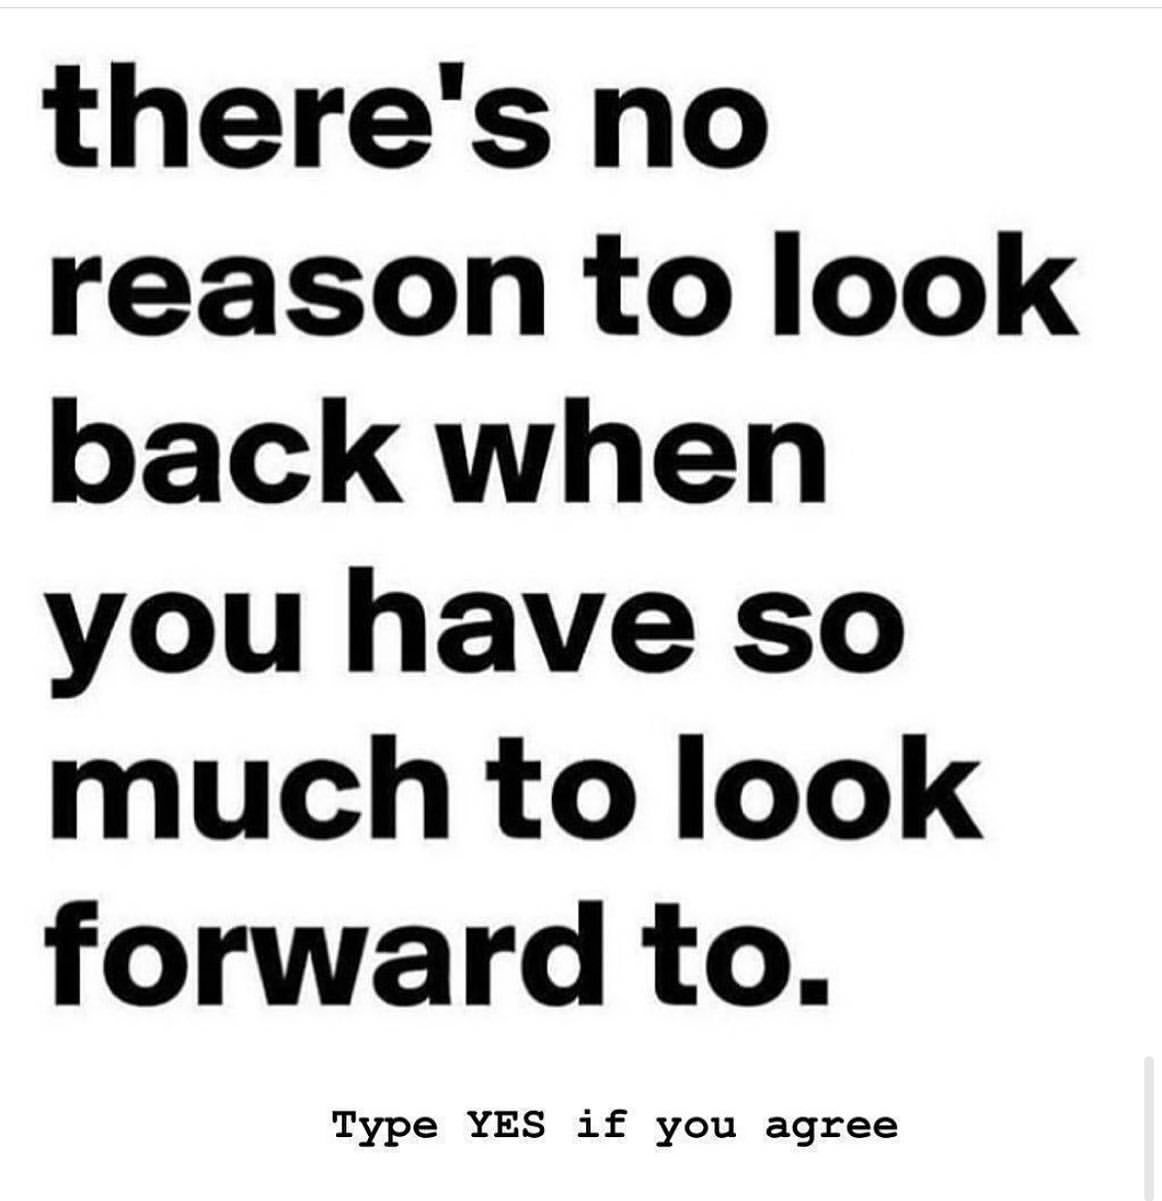 There's no reason to look back when you have so much to look forward to.